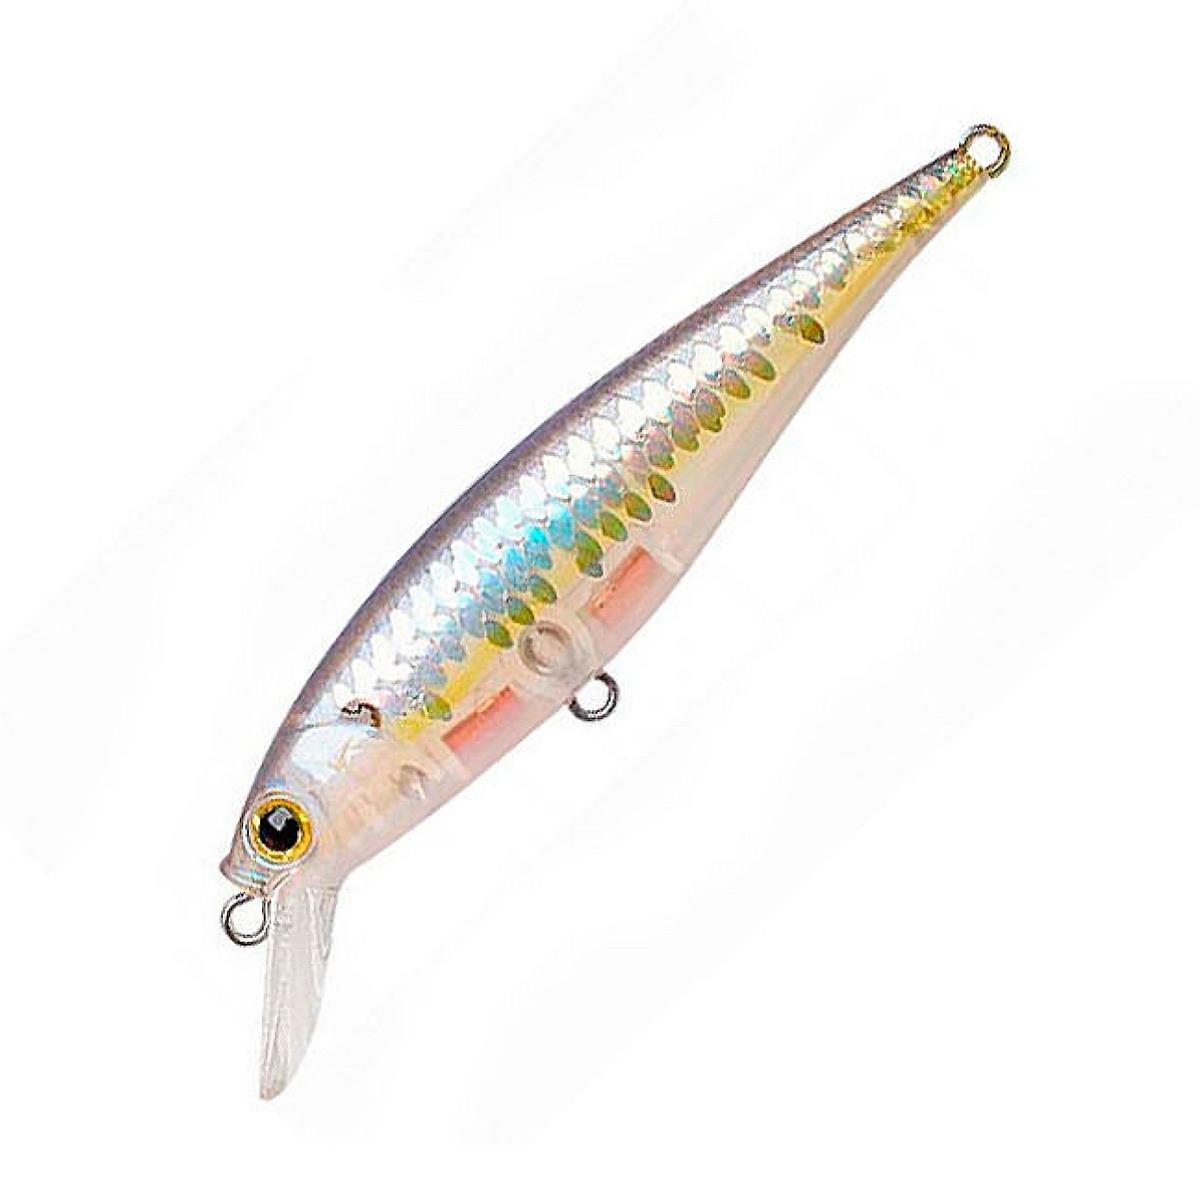 Воблер Pointer 78-225 Ghost Chartreuse Shad Lucky Craft воблер clutch ssr 270 ms american shad lucky craft